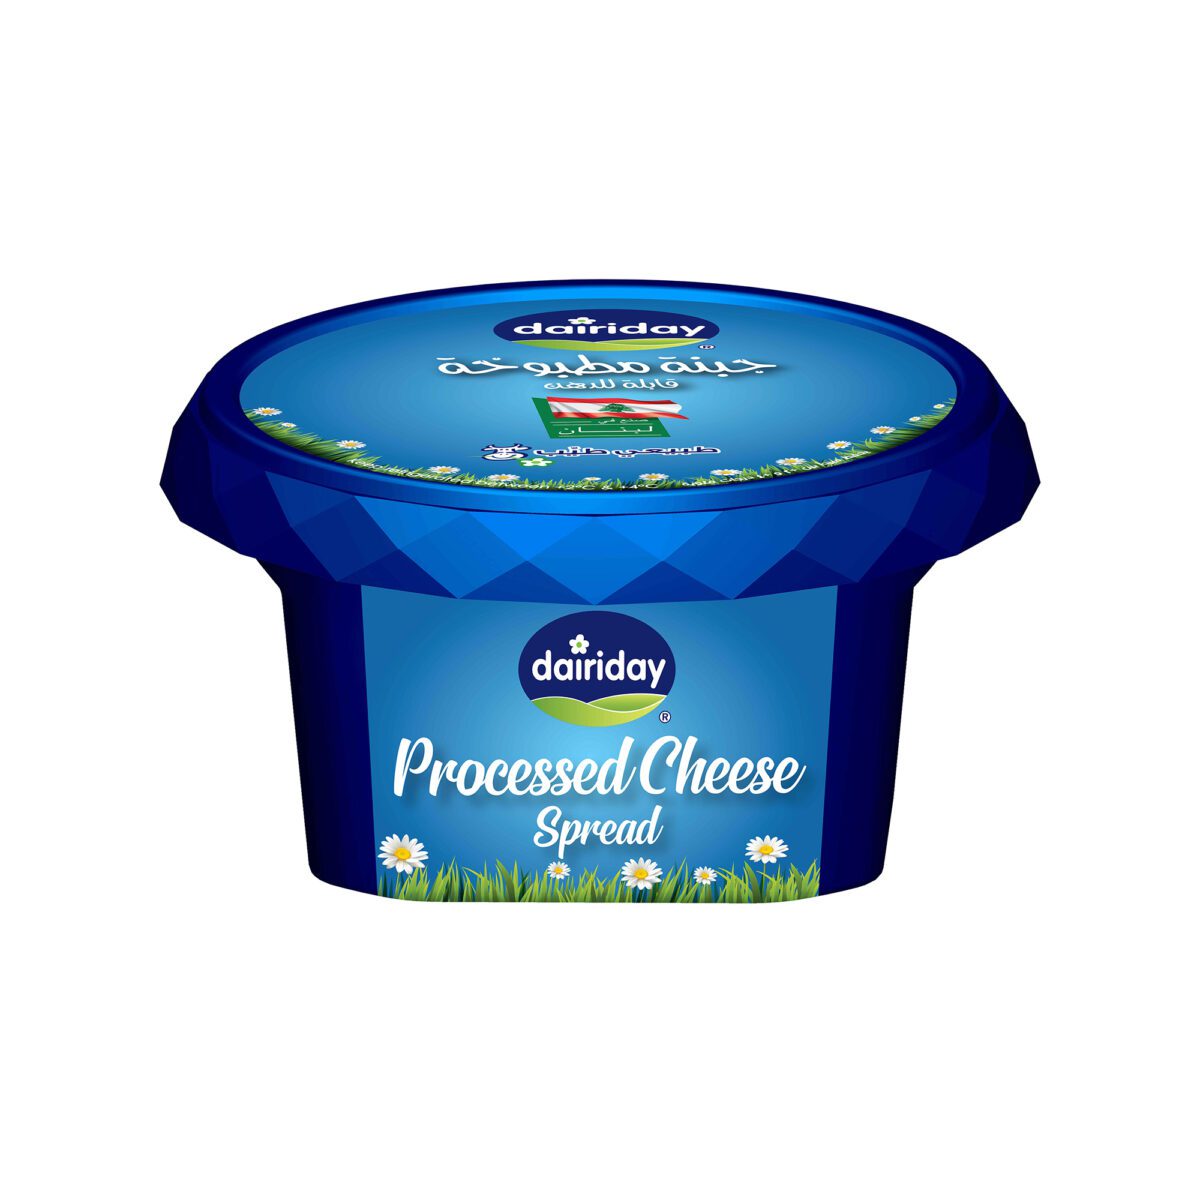 Dairiday-Processed-Cheese-Spread-150g